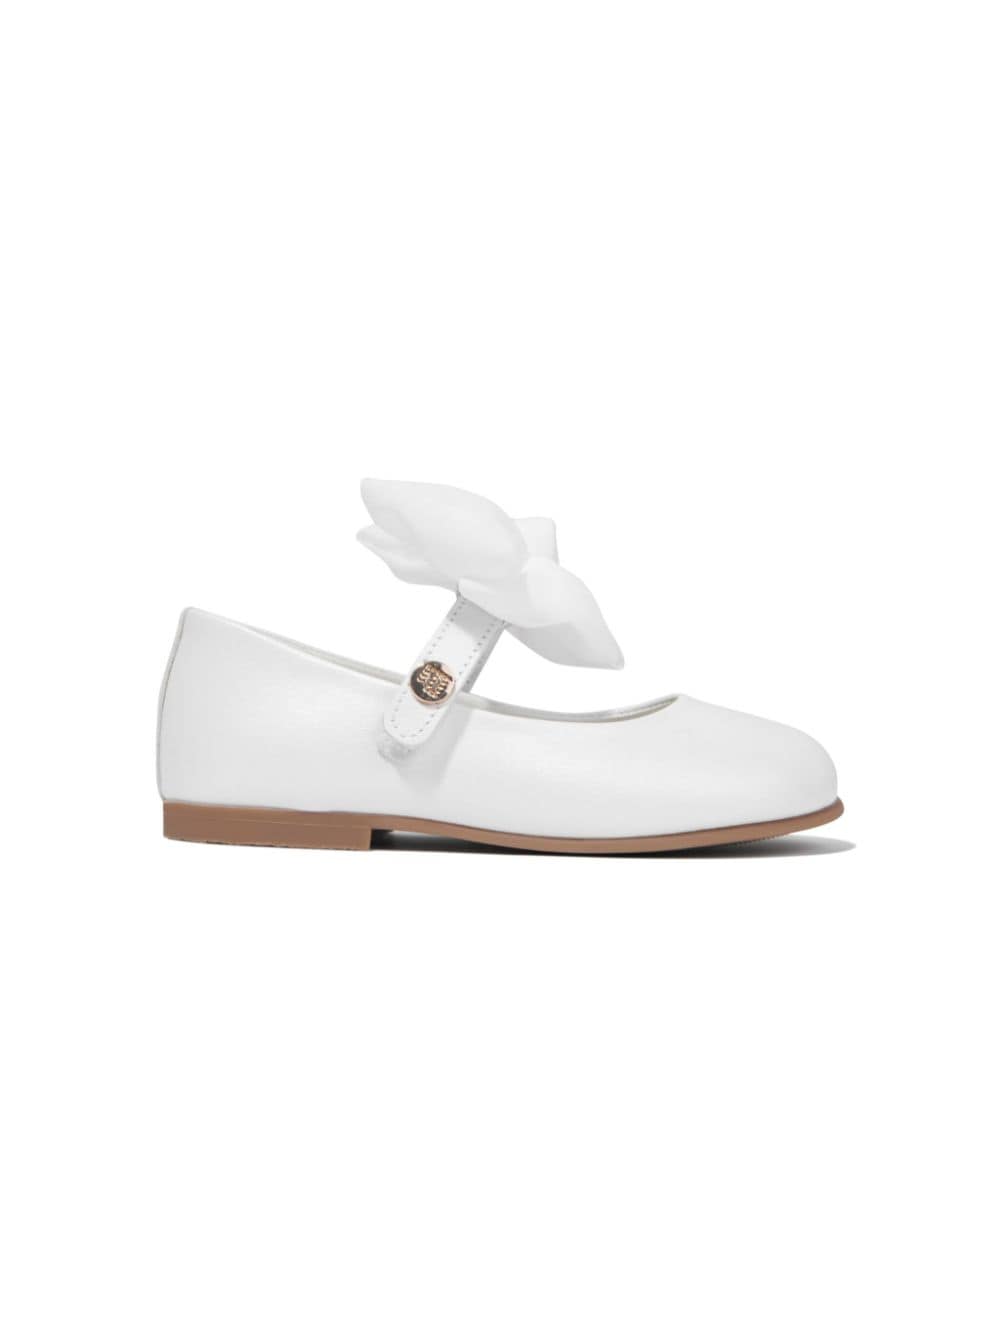 ANDANINES bow-embellished leather ballerina shoes - White von ANDANINES